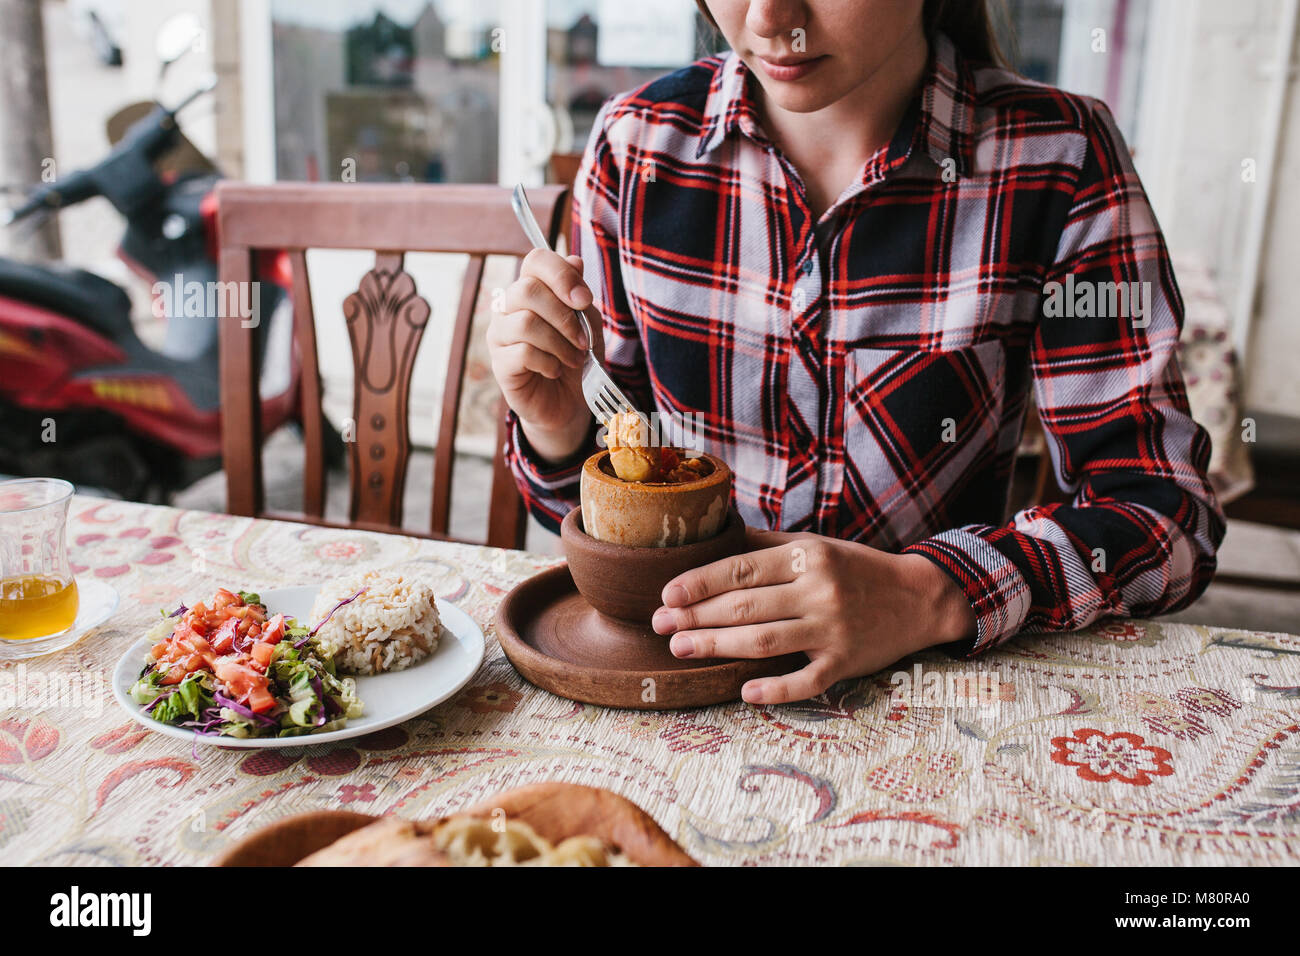 A restaurant visitor eats a national Turkish dish in a pot that is broken before being consumed called Testi-kebab. Stock Photo